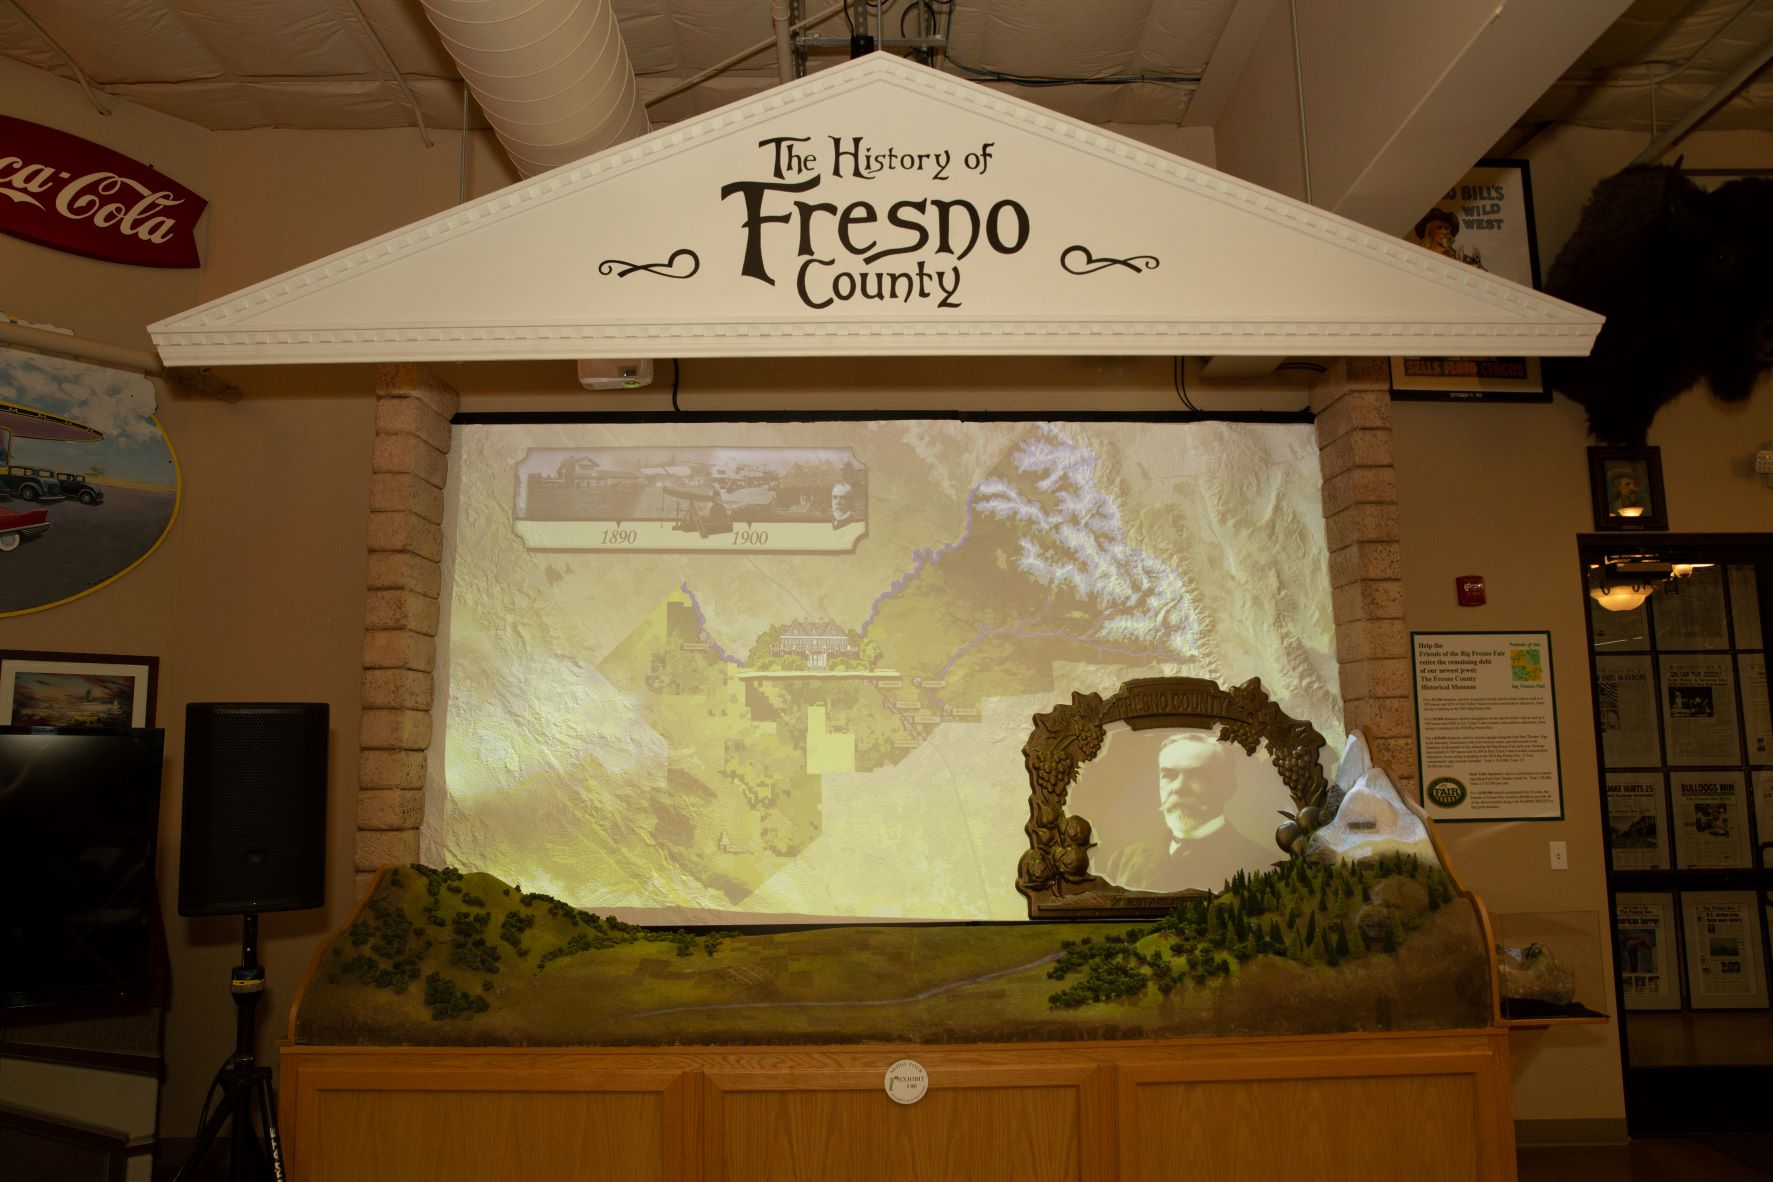 The History of Fresno County interactive exhibit on second floor of Fresno County Historical Museum